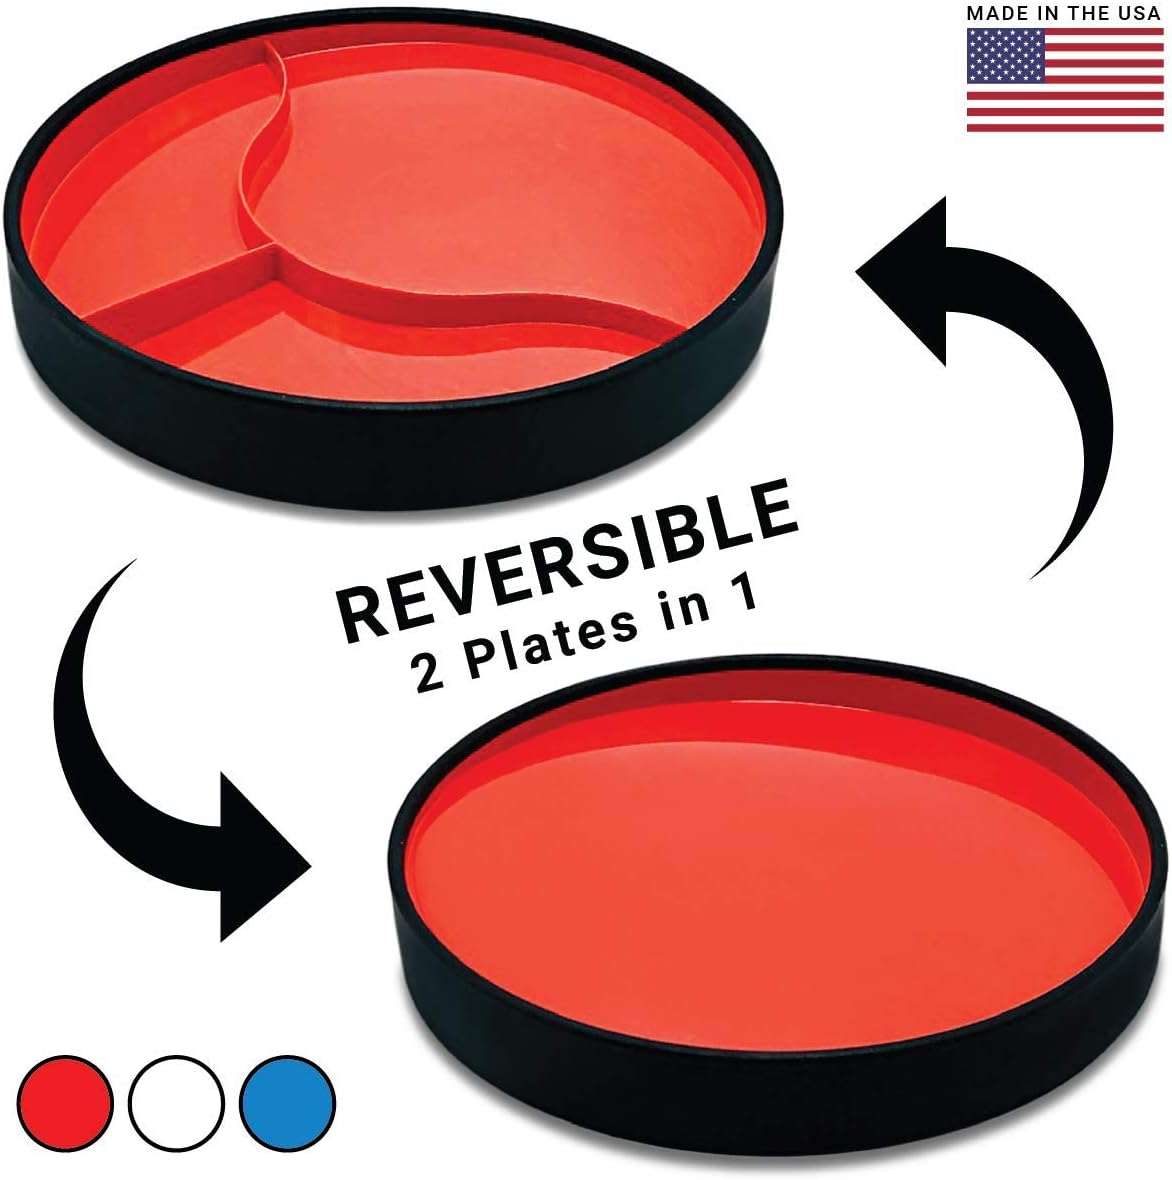 red plate shown as being reversible. 2 plates in 1: Non slip, suction, scoop plate for easier eating that's BPA free for adults